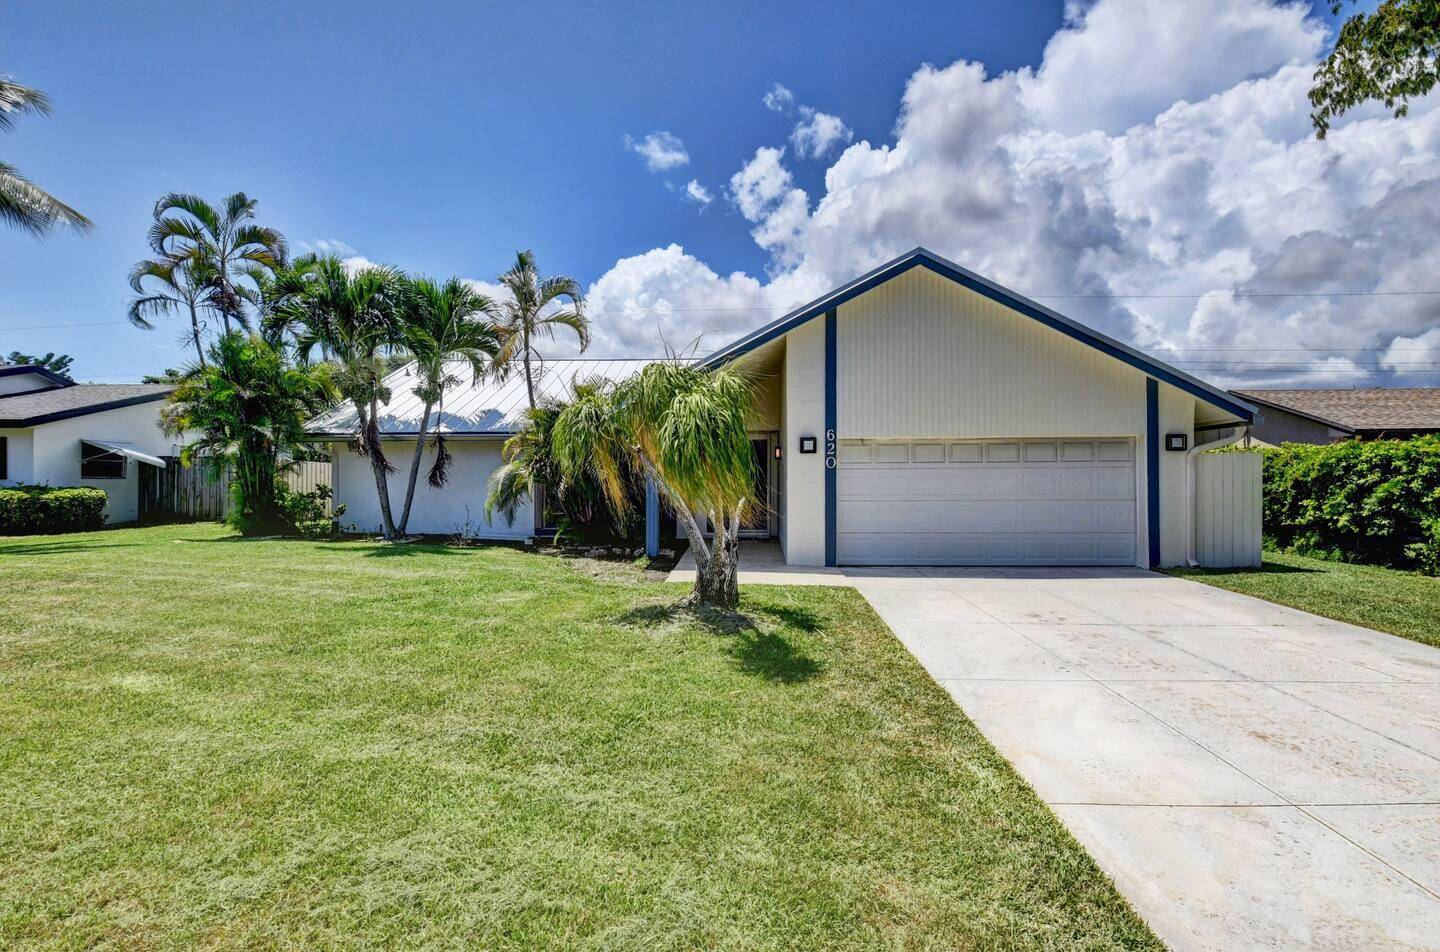 Welcome to a remarkable single family residence nestled in the prestigious Tropic Palms neighborhood.